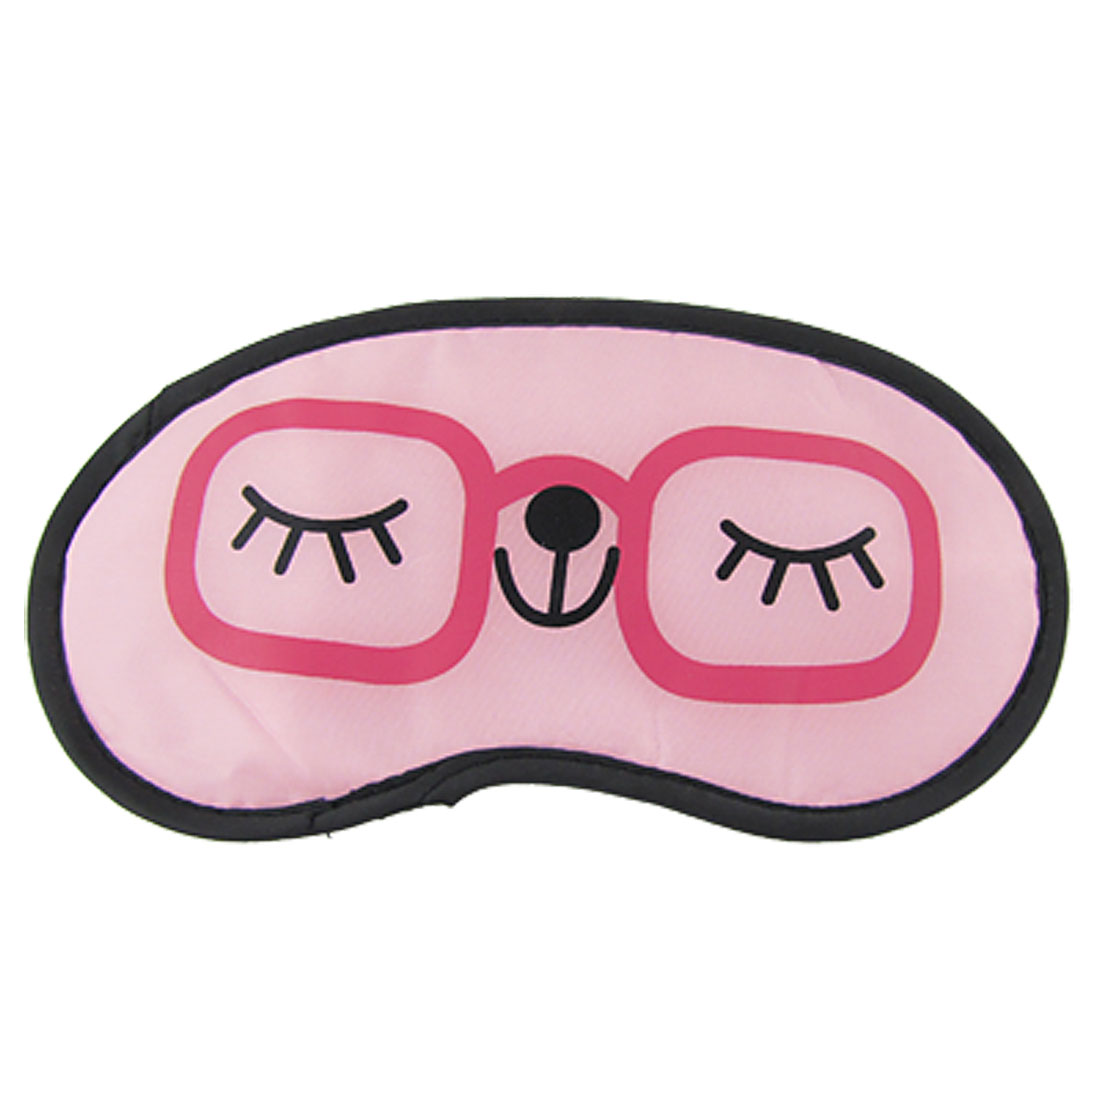 Free Eye Mask Cliparts, Download Free Clip Art, Free Clip.